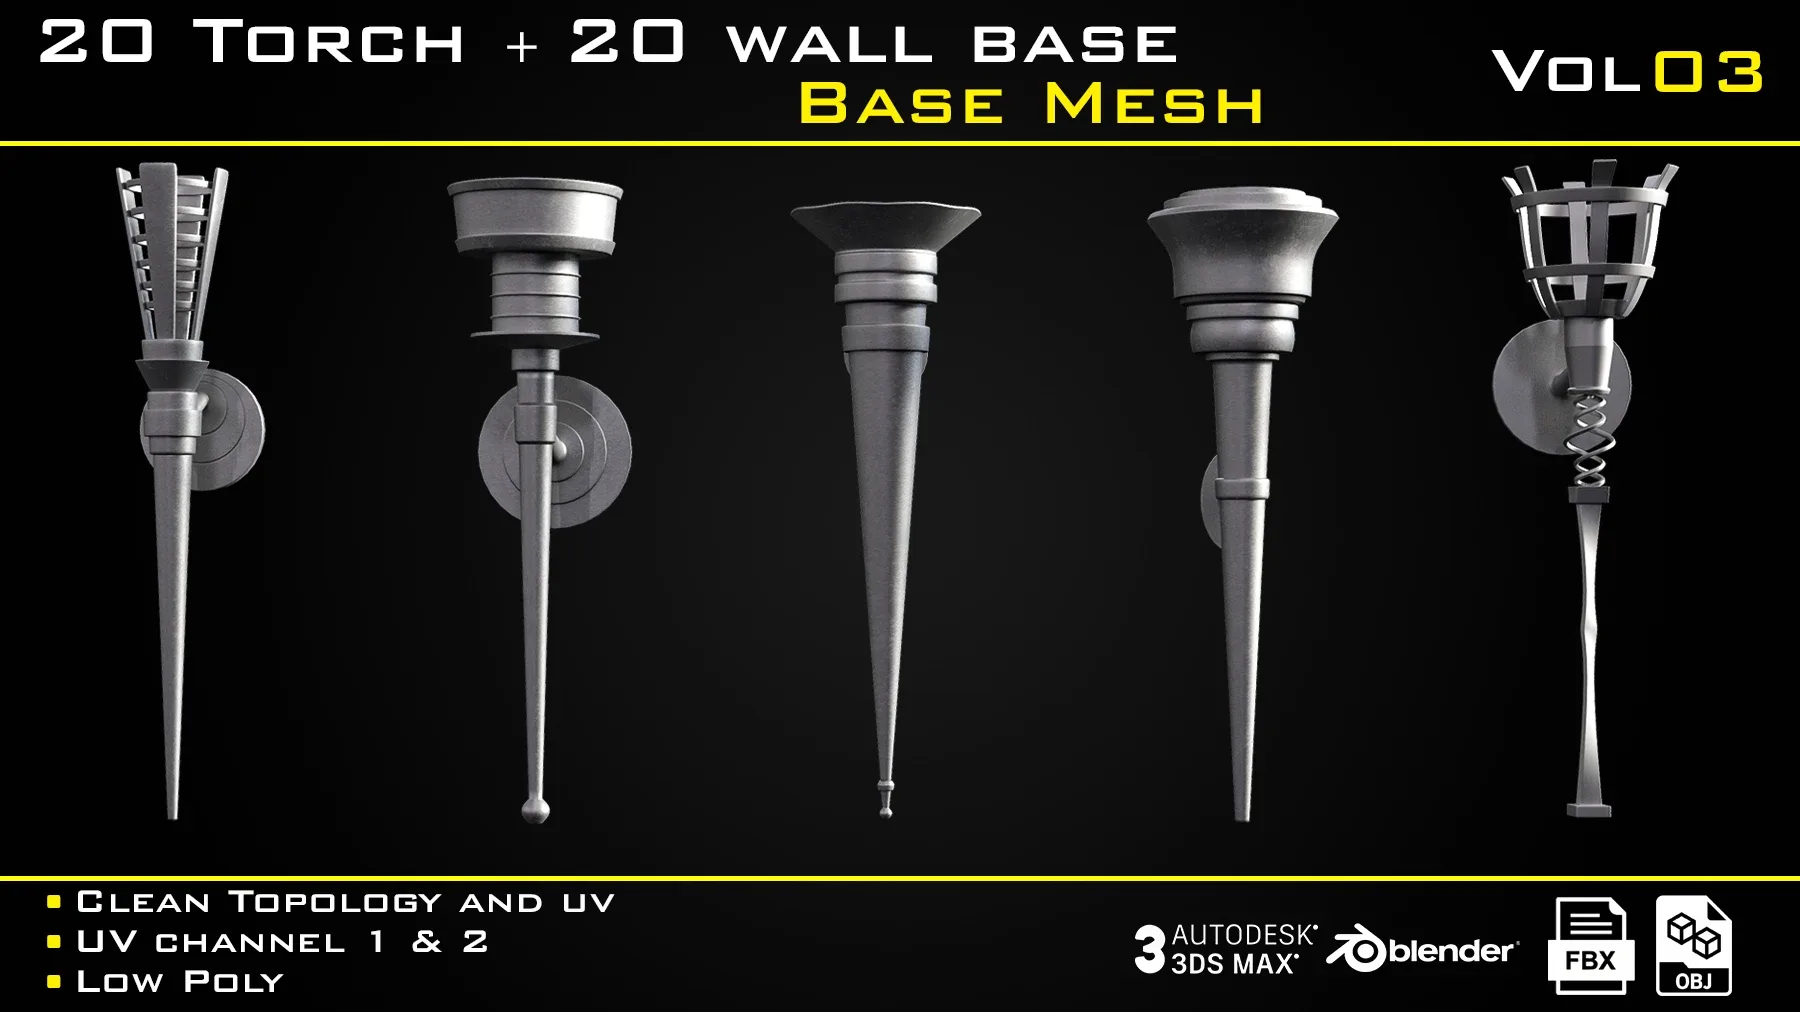 20 Torch with 20 wall base - BASE MESH - VOL 03 Game ready